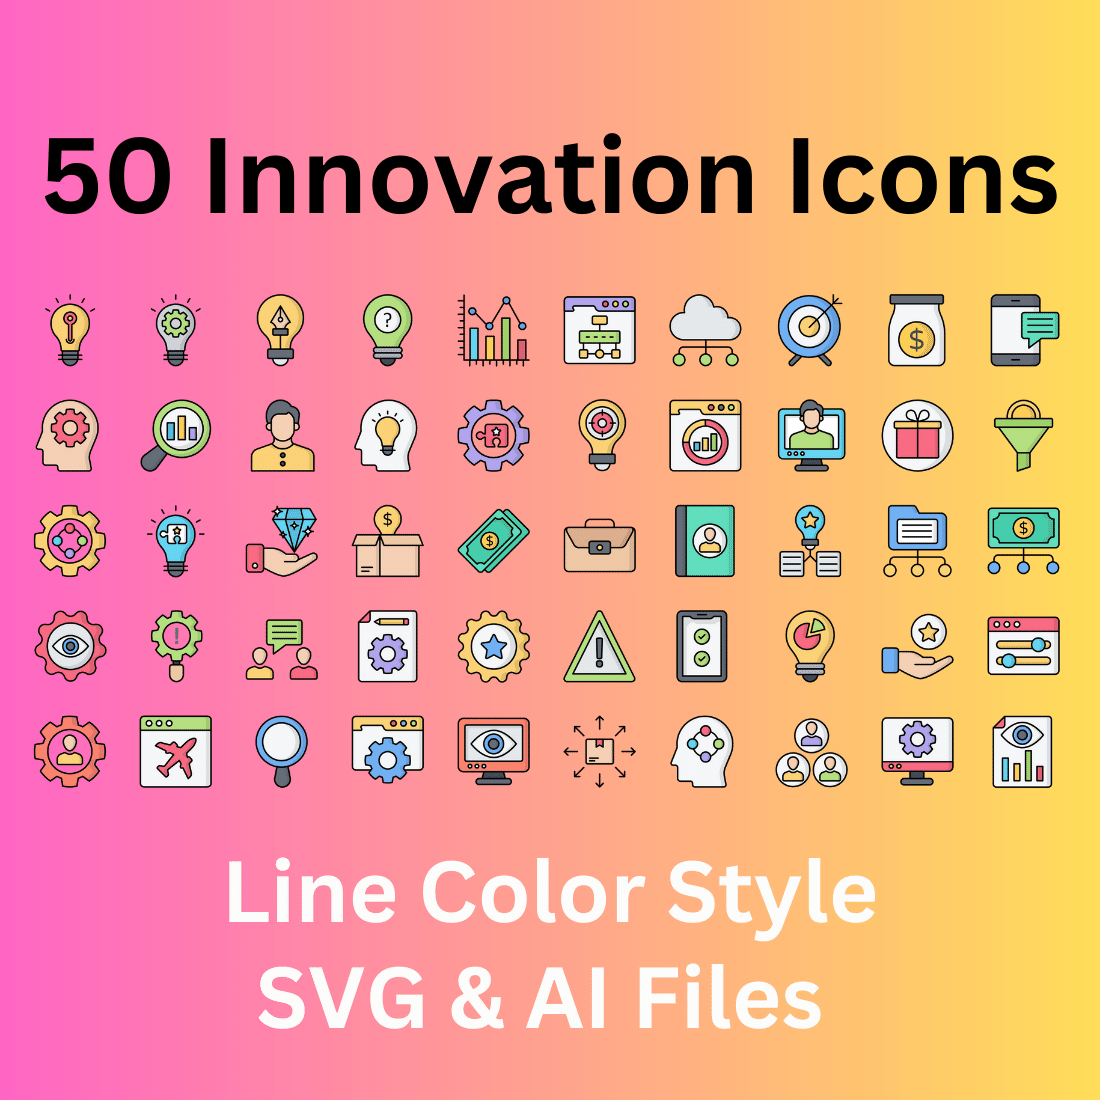 Innovation Icon Set 50 Line Color Icons - SVG And AI Files cover image.